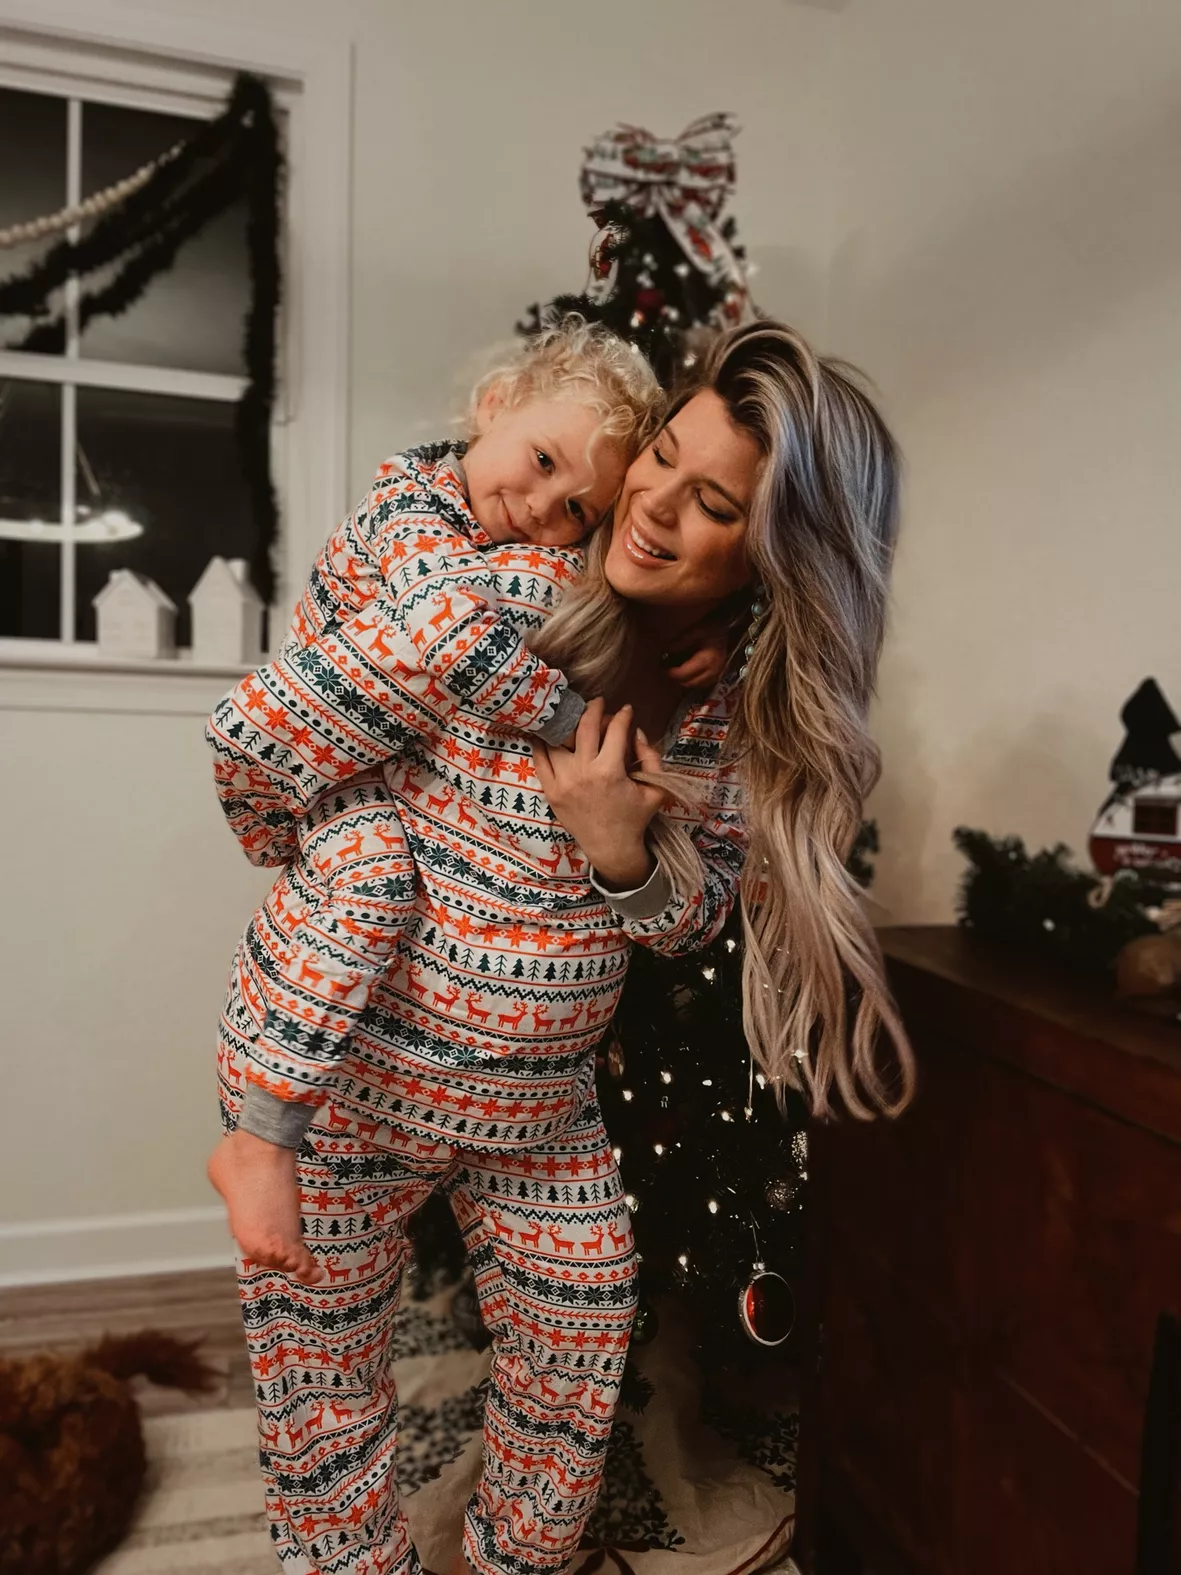 Where to Buy Cute Christmas Pajamas for the Whole Family